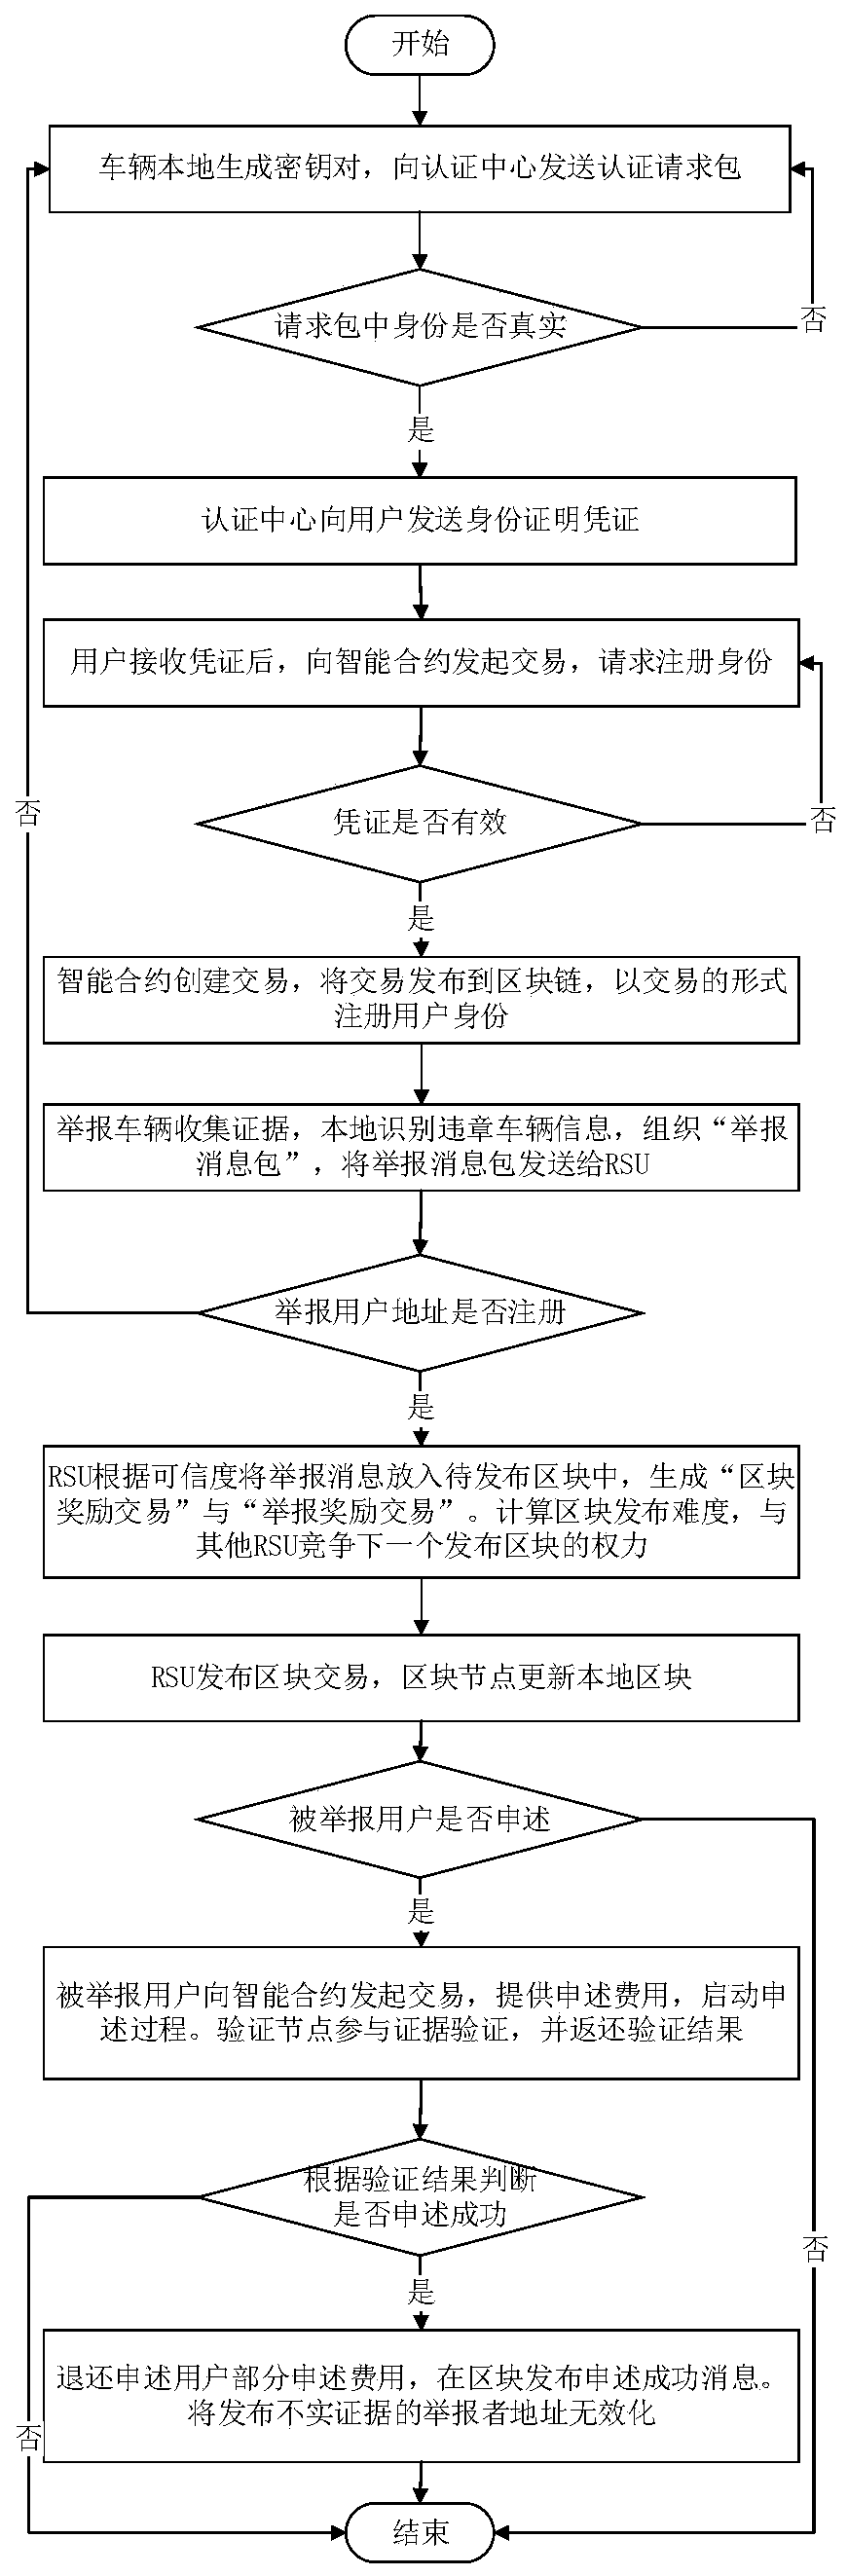 Semi-distributed vehicle violation reporting method based on block chain